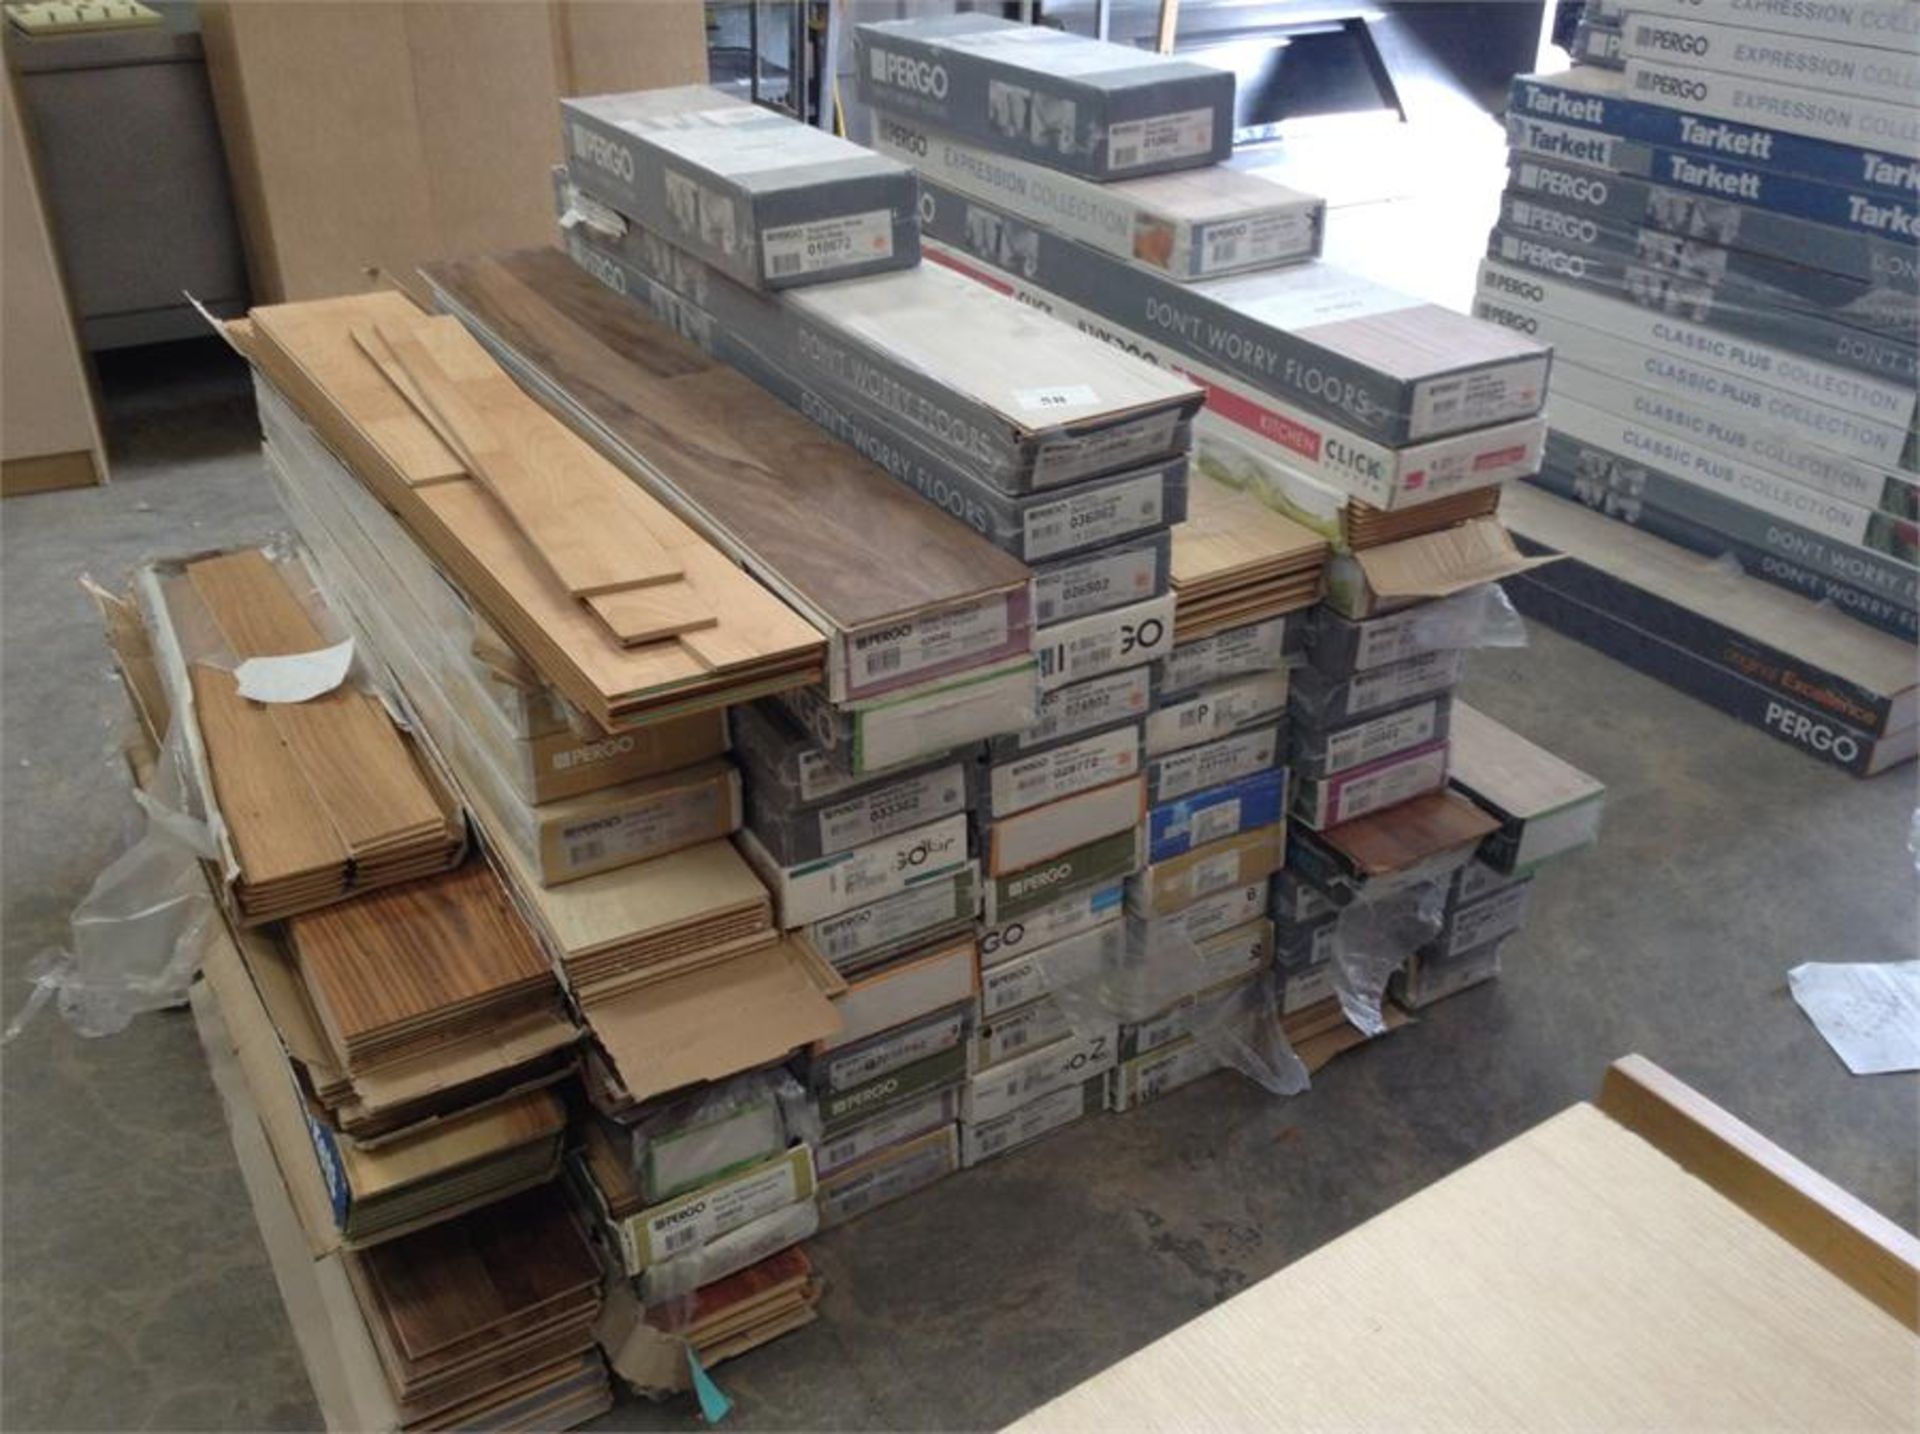 43 Packs or assorted lamintate floorings. Ideal for porches, hallways etc